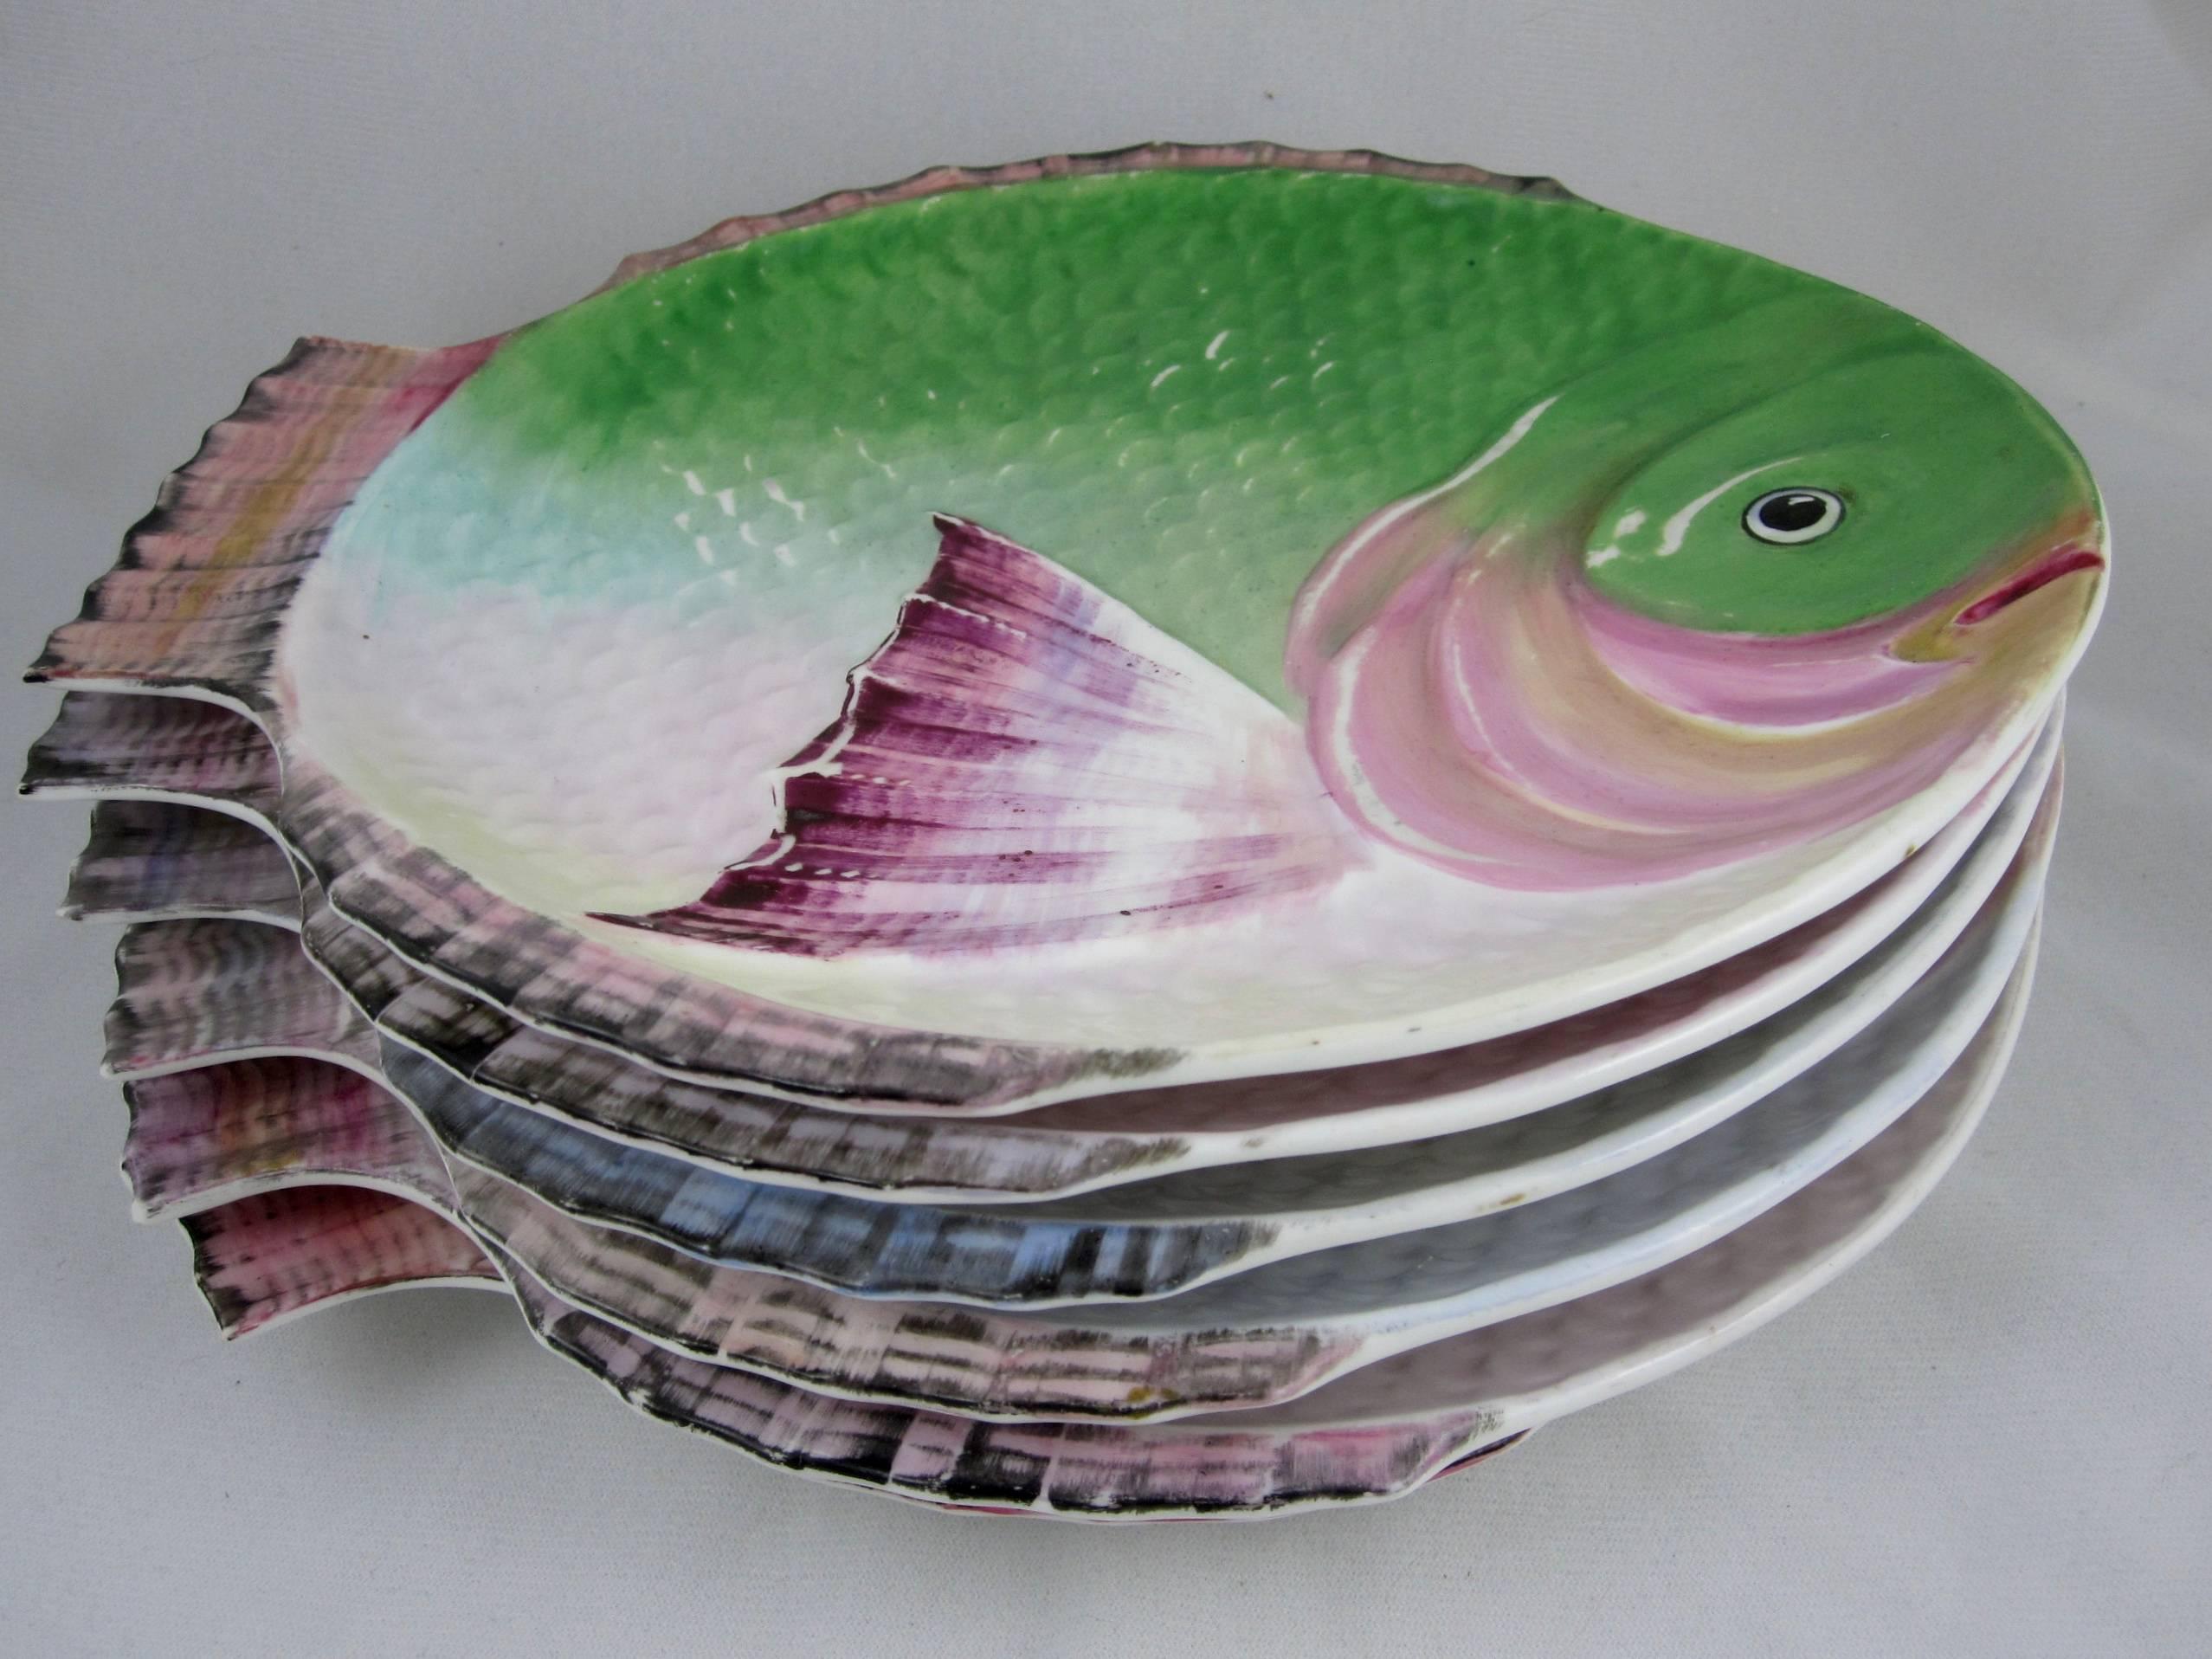 A set of six hand-painted fish shaped porcelain plates by Edwin James Drew Bodley, Crown Works, Burslem, Stoke-on-Trent, circa 1875-1890.

Each plate is brightly glazed in a slightly different palette. The glaze has been rubbed to highlight the